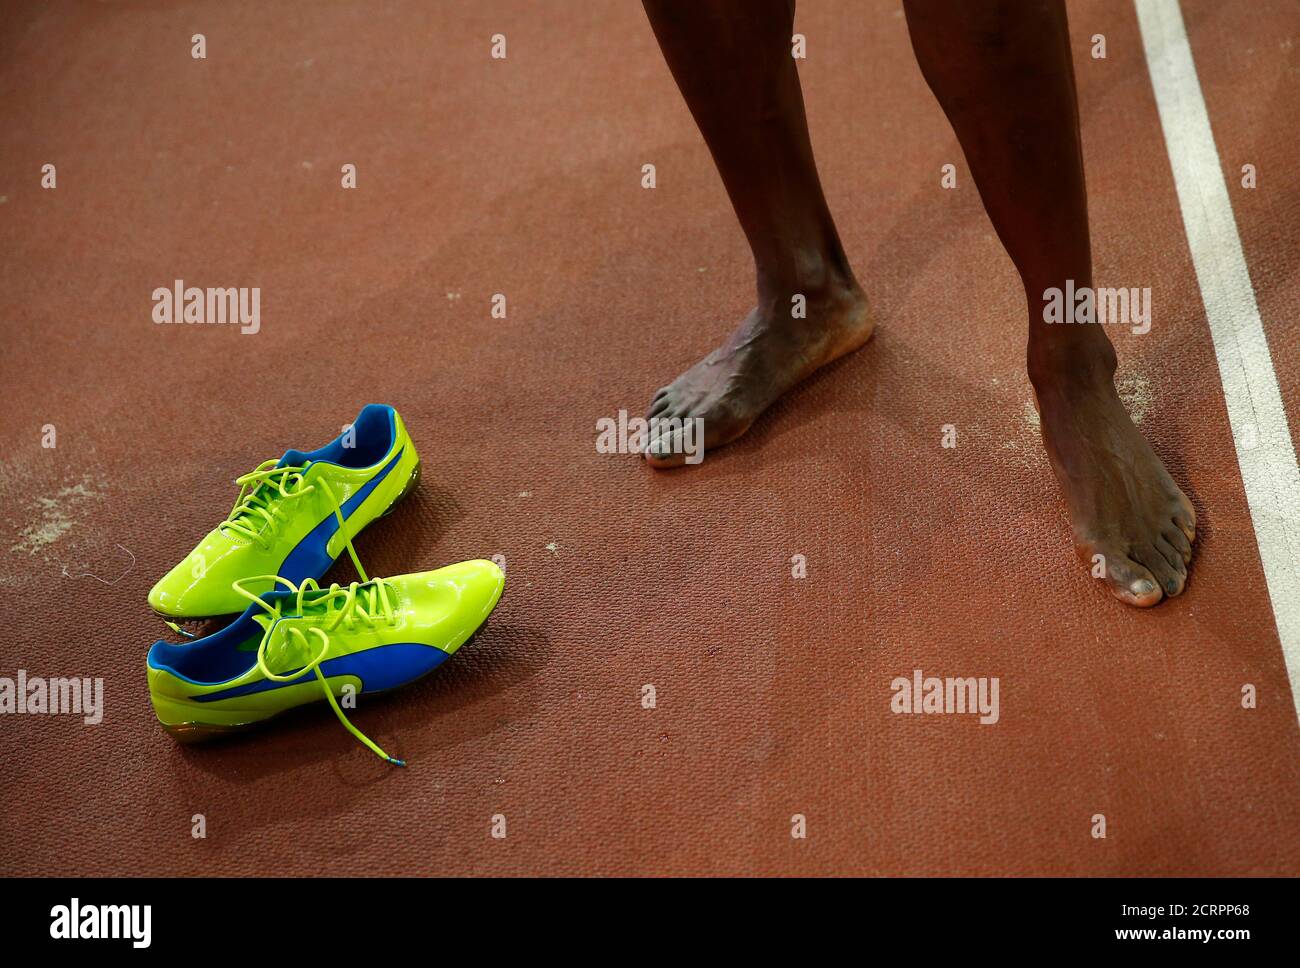 the-feets-and-shoes-of-usain-bolt-of-jamaica-after-he-won-the-mens-200-metres-final-during-the-15th-iaaf-world-championships-at-the-national-stadium-in-beijing-china-august-27-2015-reuterskai-pfaffenbach-2CRPP68.jpg